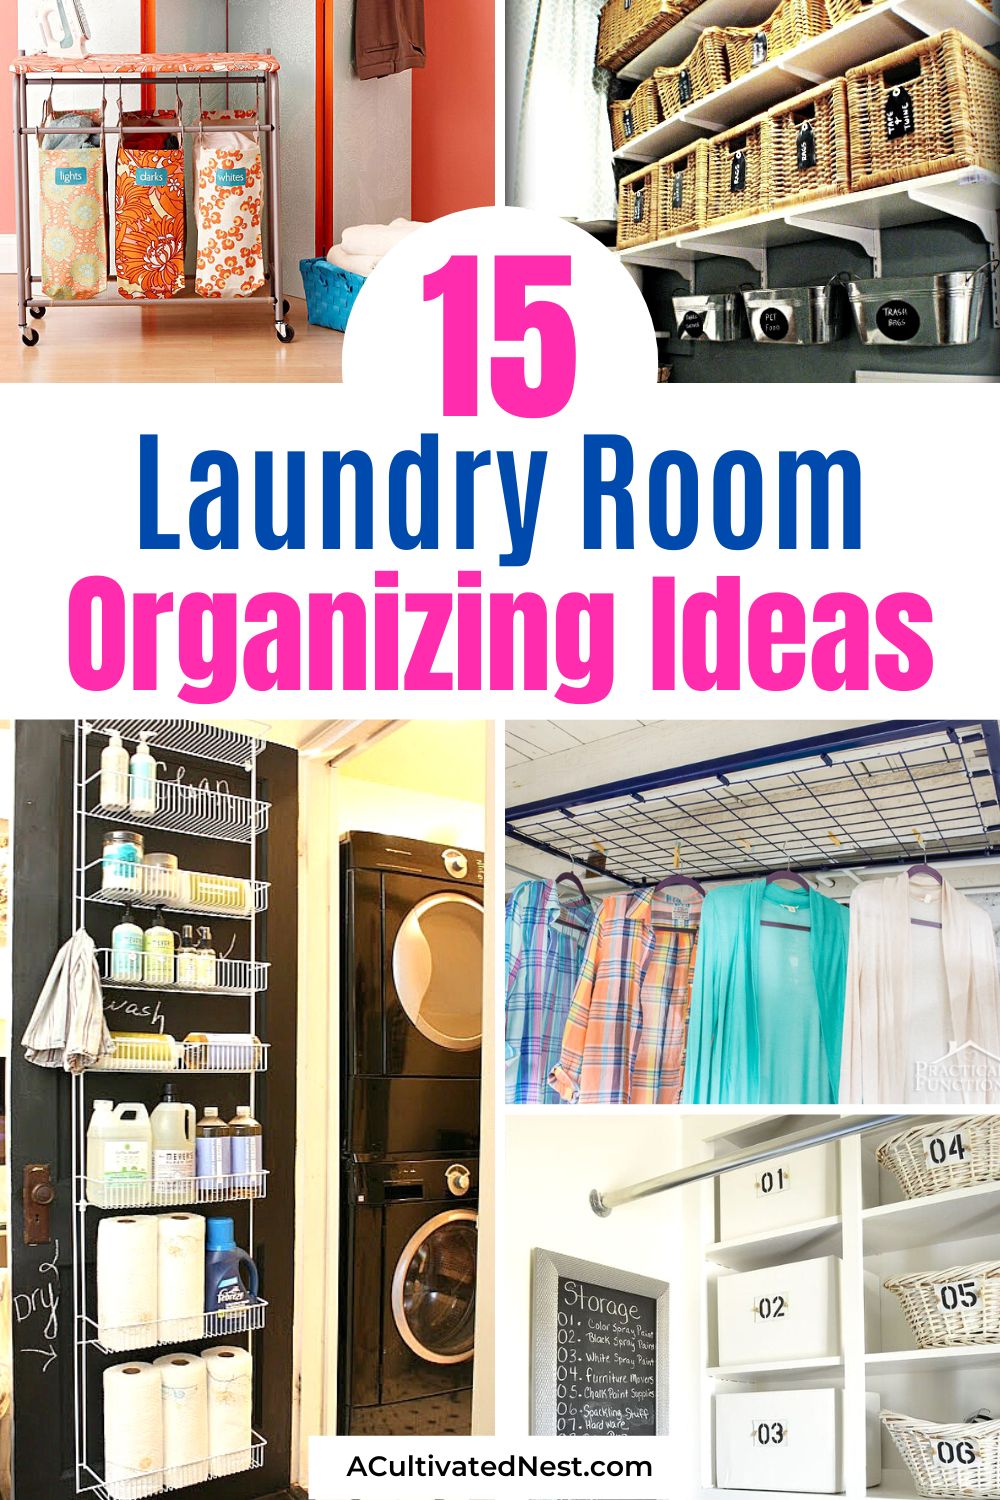 15 Laundry Room Organization Ideas- If you're tired of having a messy laundry room, then you'll love these laundry room organization ideas! There are so many easy DIYs and frugal hacks you can do to improve your laundry area's storage! | #organizingTips #organization #laundryRoom #homeOrganization #ACultivatedNest